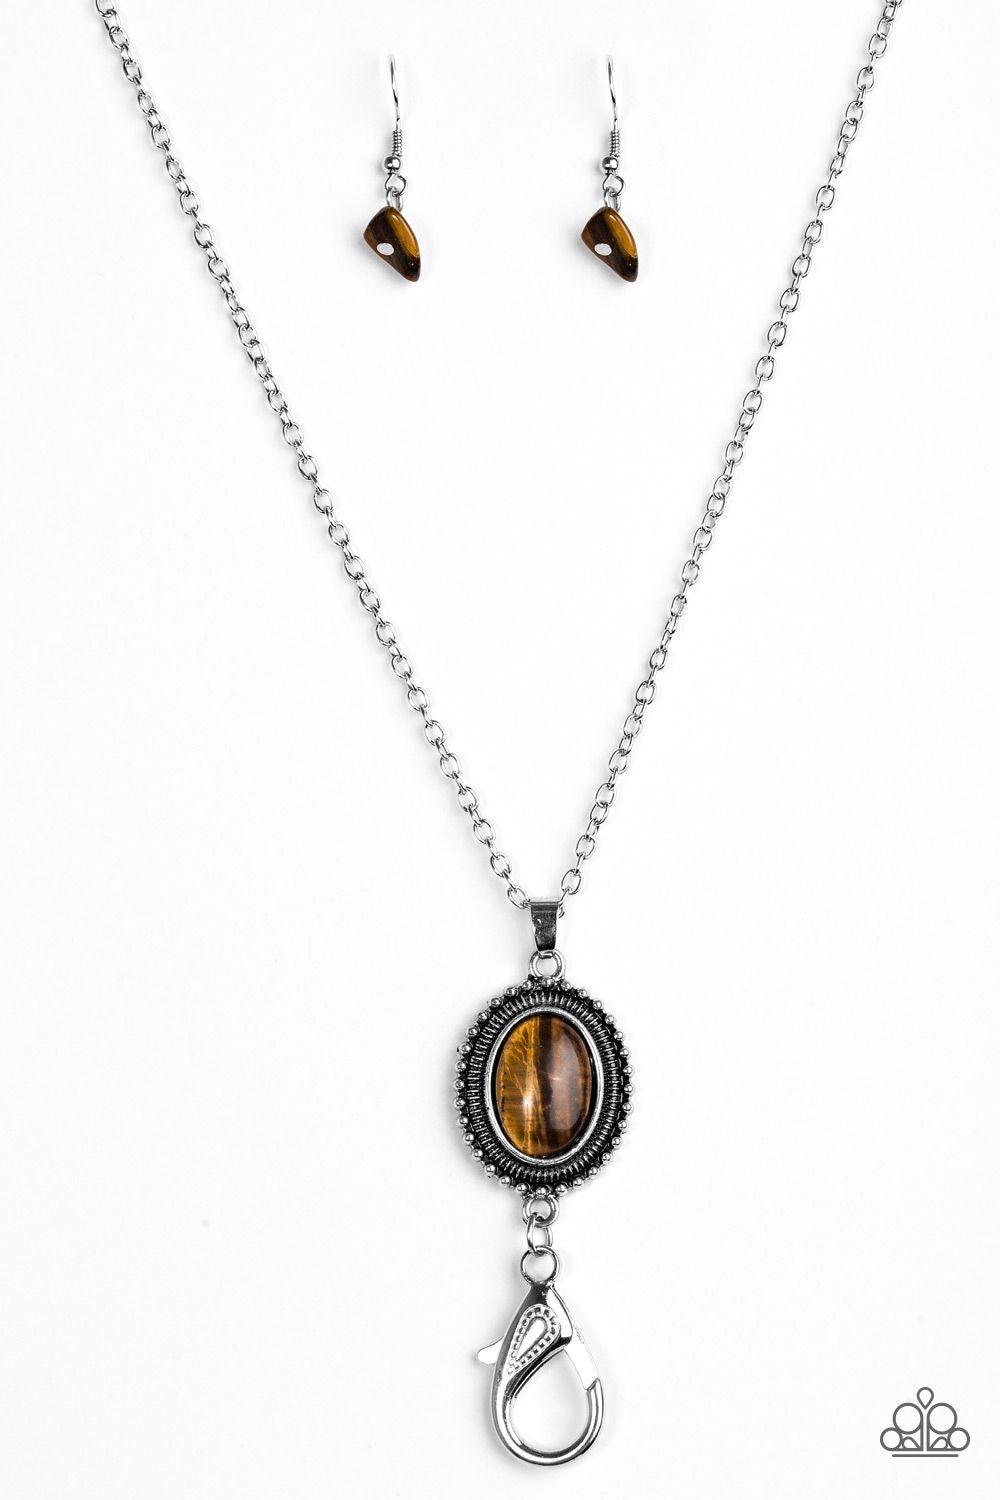 Paparazzi Accessories Canyon Climb - Brown *Lanyard A refreshing brown stone swings from the bottom of a lengthened silver chain, creating an earthy pendant. A lobster clasp hangs from the bottom of the design to allow a name badge or other item to be att